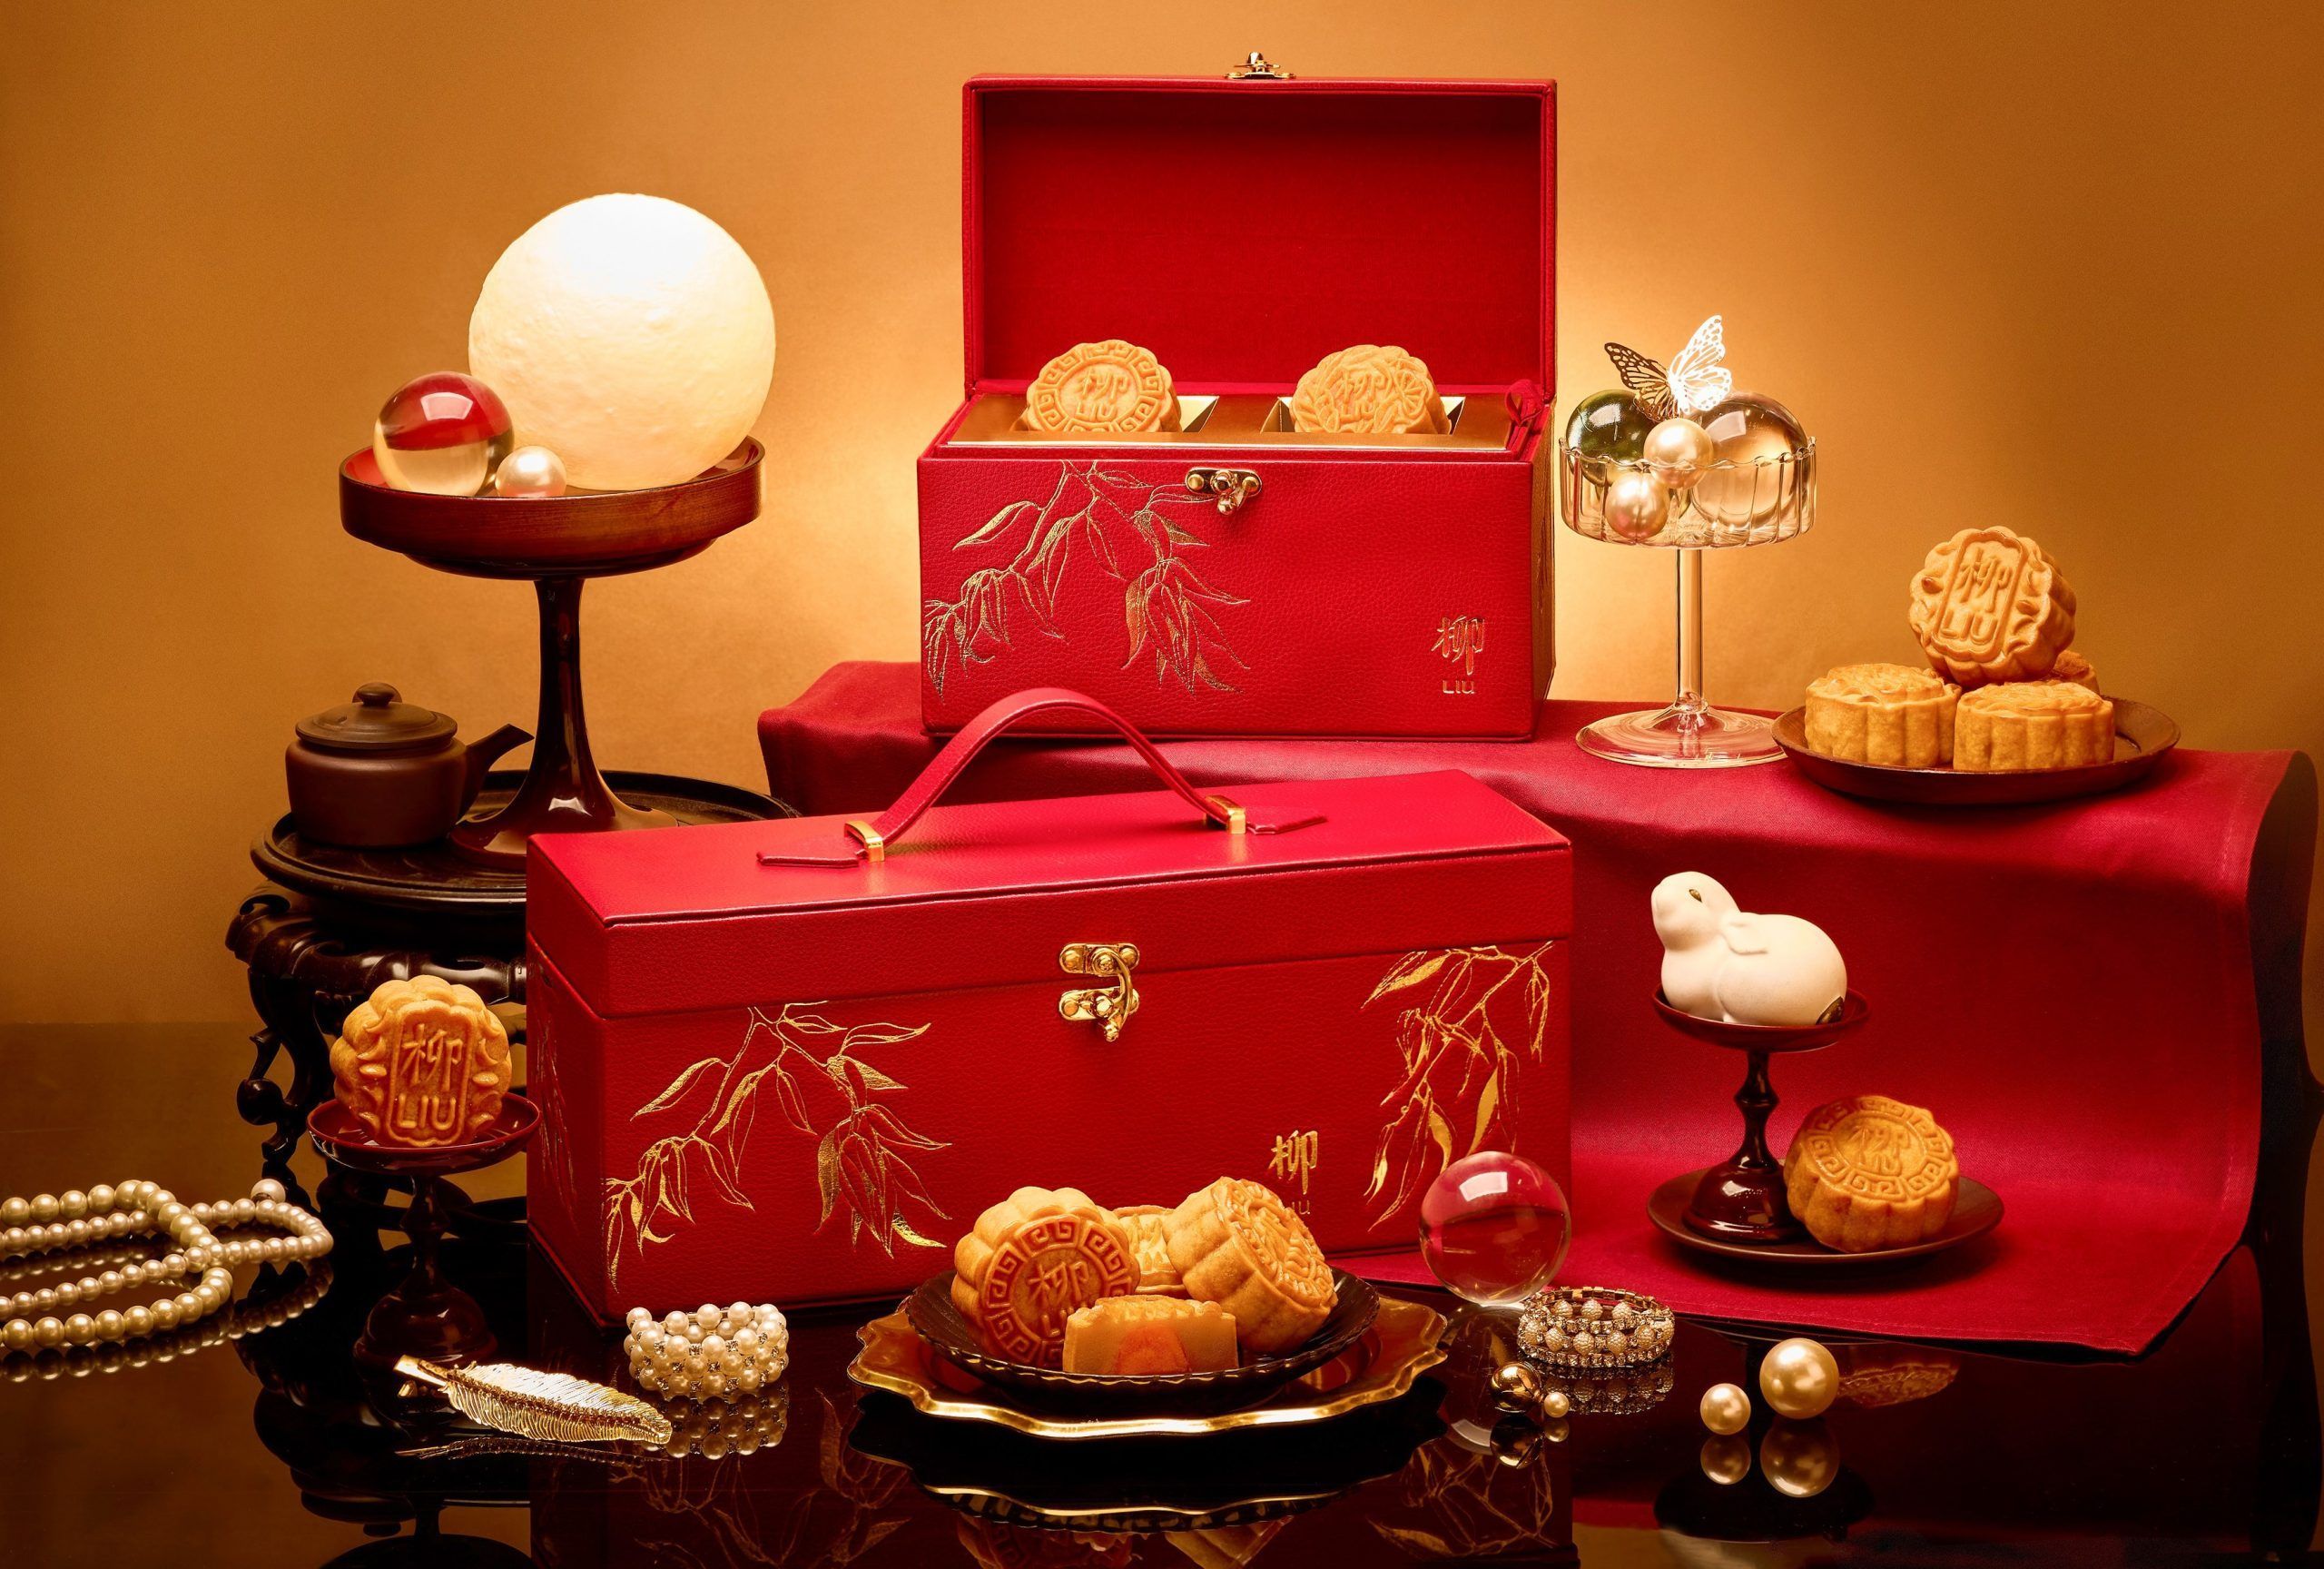 Where to Find the Best Mooncakes to Celebrate the MidAutumn Festival